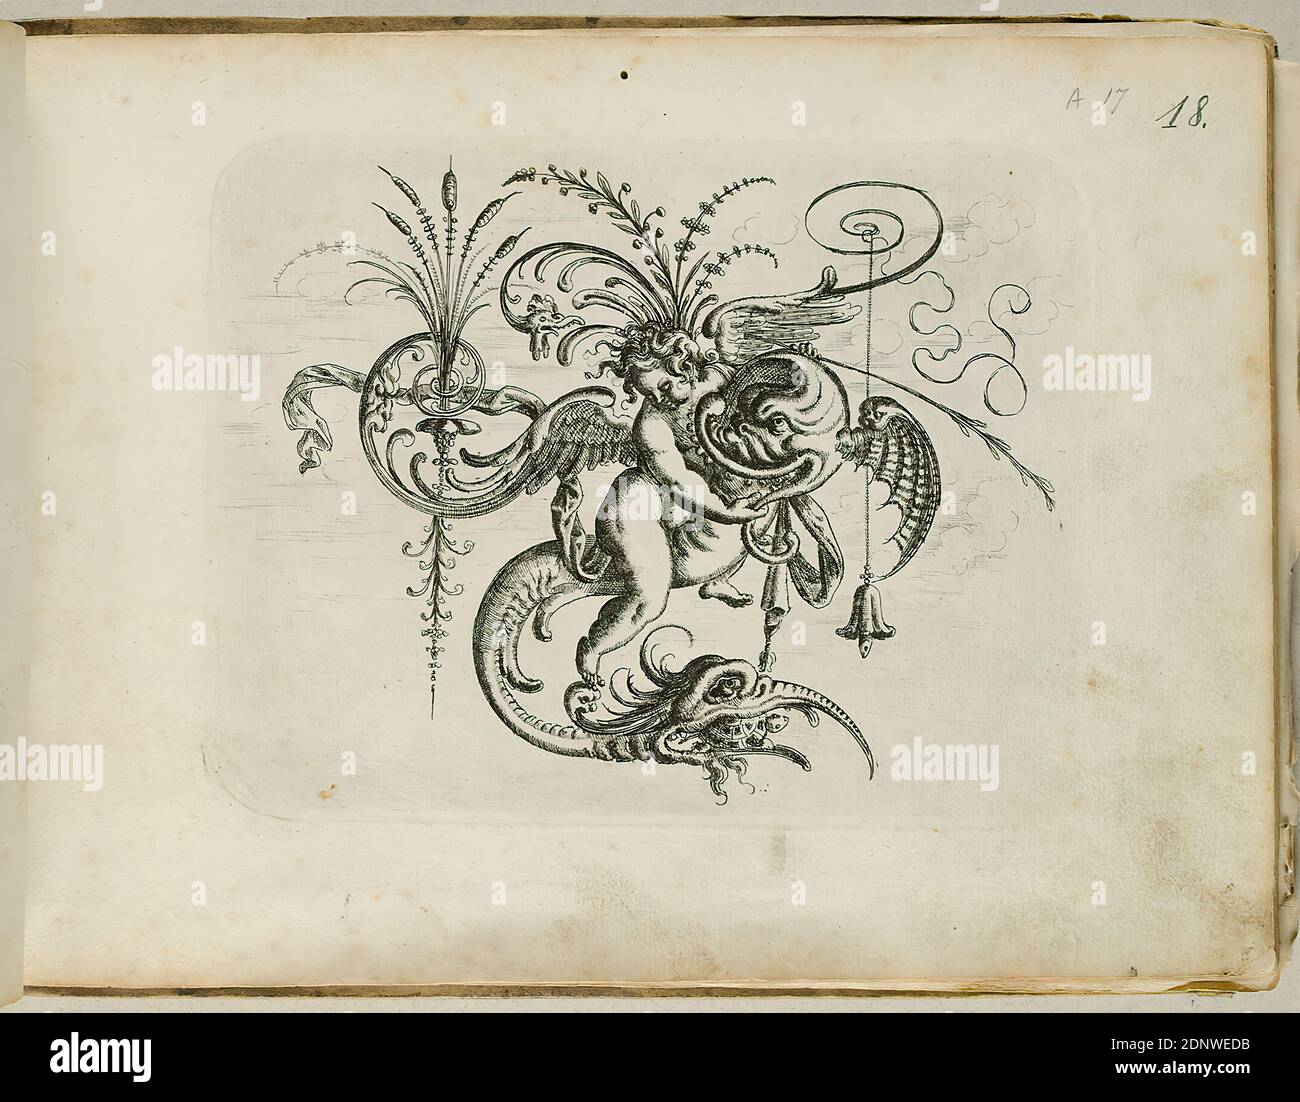 Christoph Jamnitzer, Putto, sheet from the Neuw Grotteßken book, paper, etching, sheet size: height: 19.90 cm; width: 27.70 cm, graphics, grotesque (ornament), ornaments Stock Photo